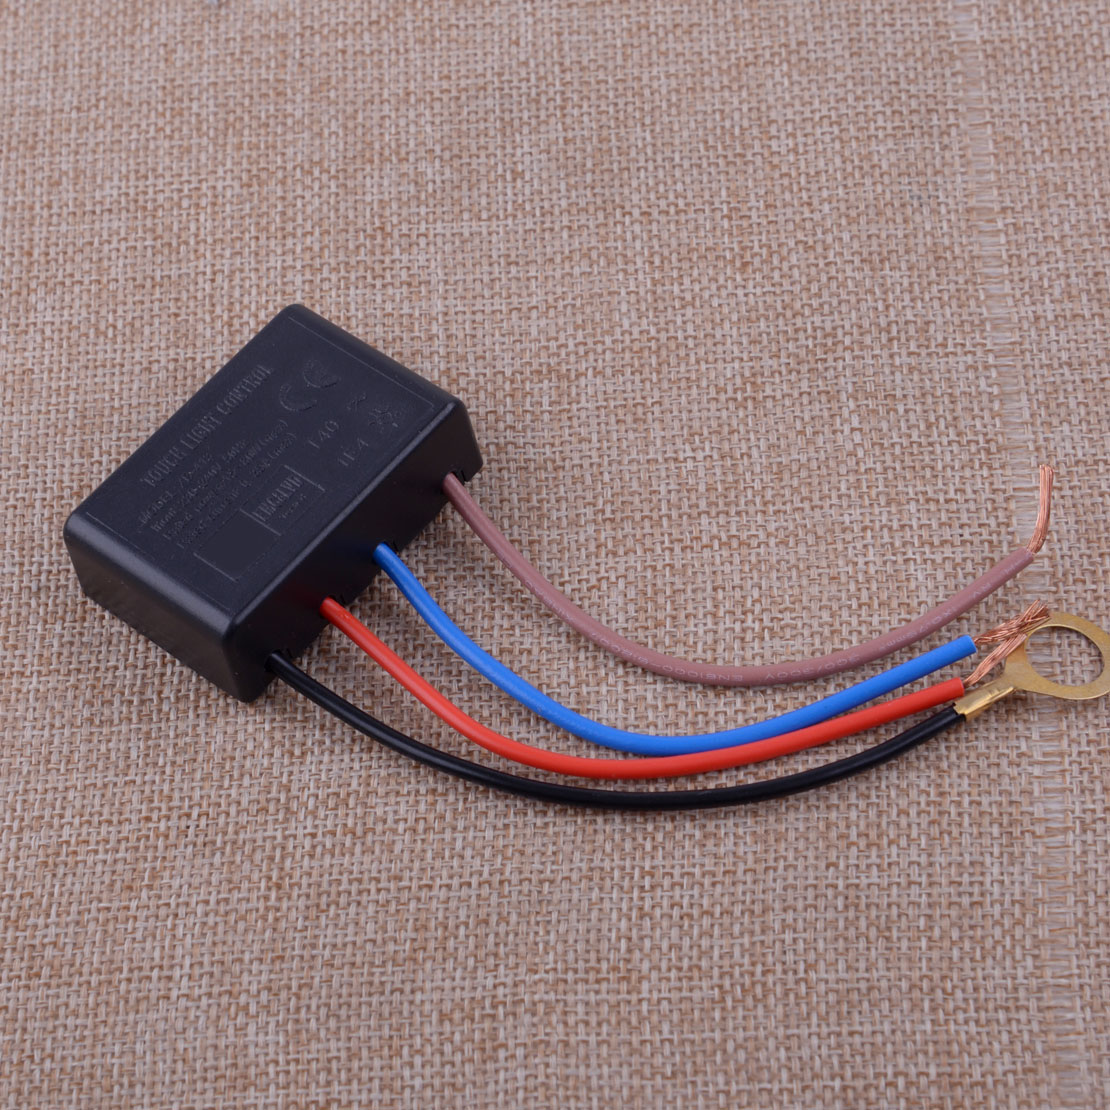 LED vy Light Lamp ON//OFF Switch Control Power Module Sensor for Incandescent